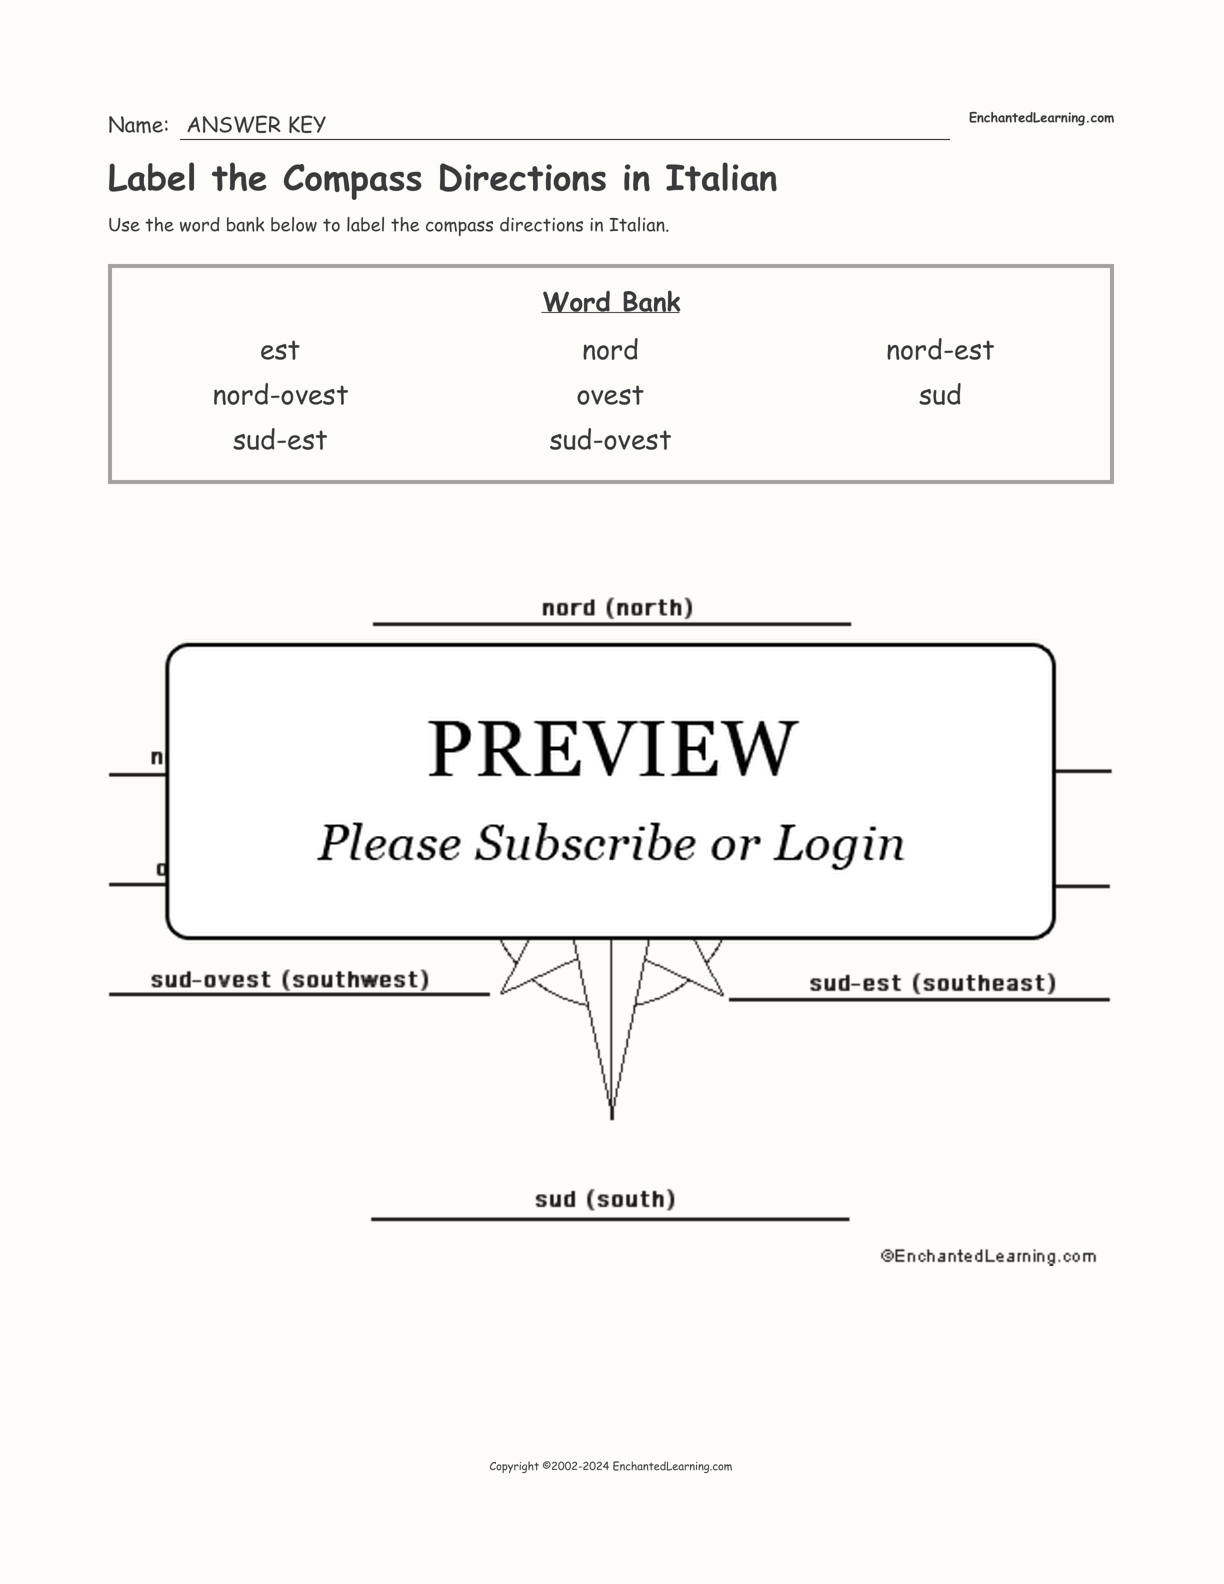 Label the Compass Directions in Italian interactive worksheet page 2